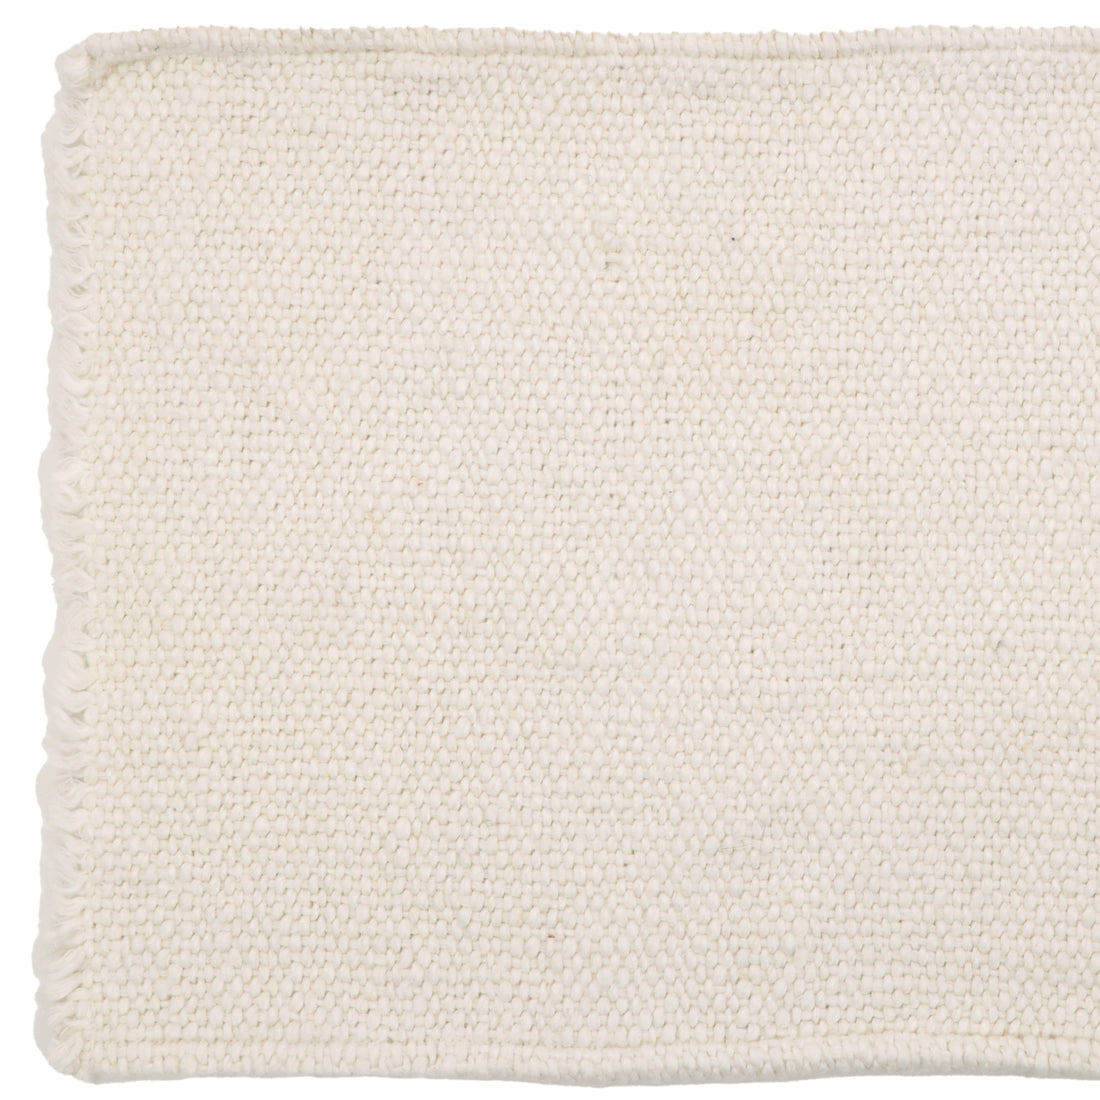 Porter Placemats, White, Set Of 4